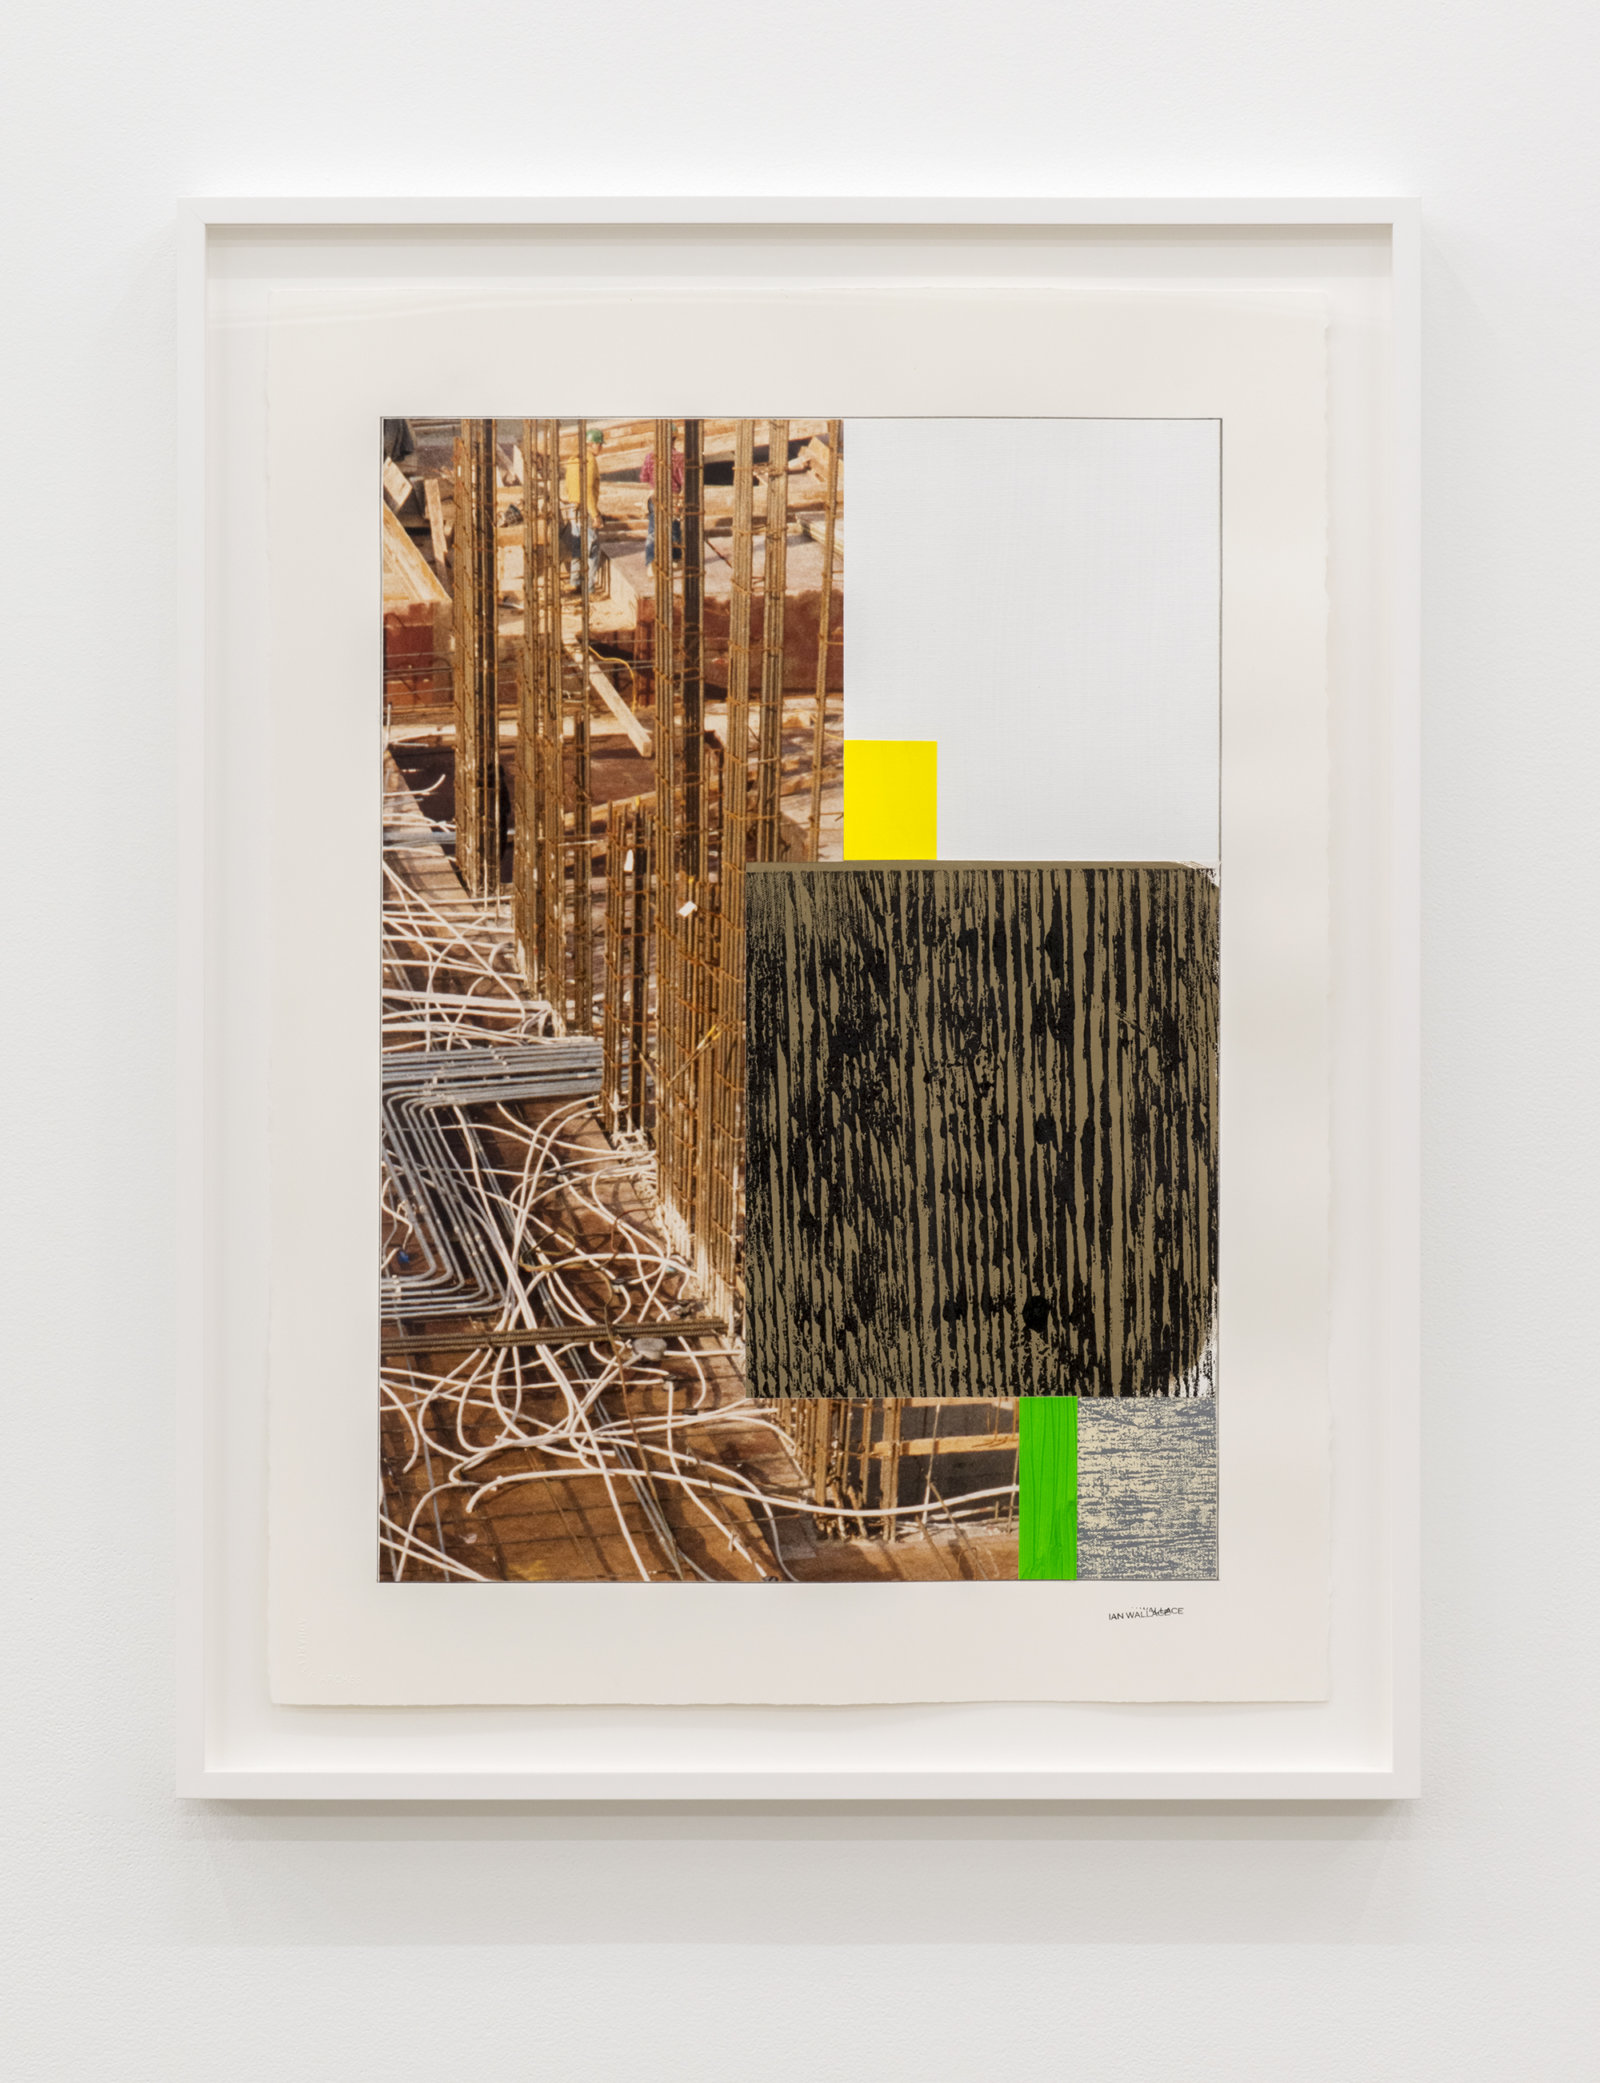 Ian Wallace, Study for Composition with Construction Site II, 1992–2012, paper, pencil, acrylic, photograph, ink, monoprint on canvas, 30 x 23 in. (77 x 57 cm)